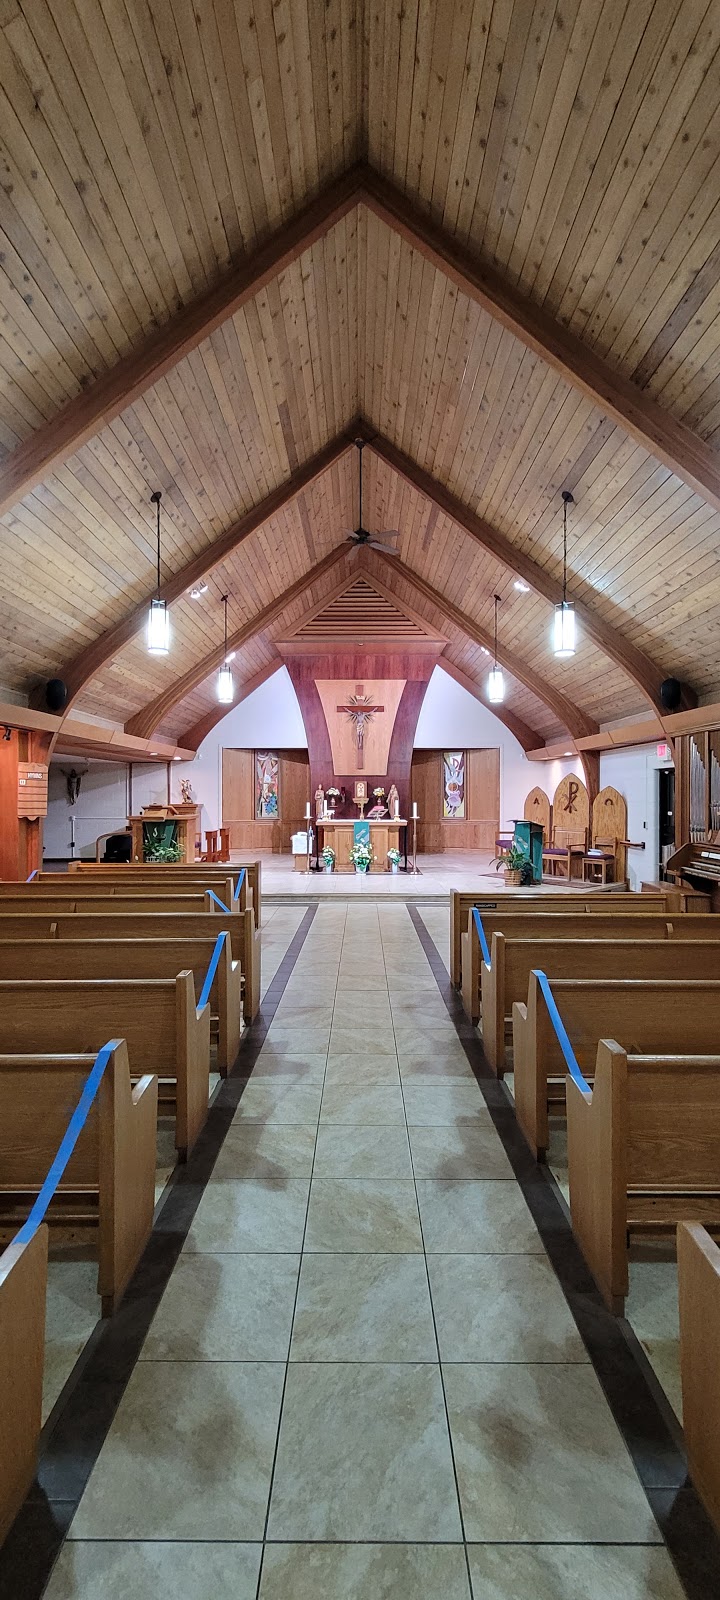 St Gaspar del Bufalo Catholic Church | Photo 1 of 10 | Address: 10871 IN-9, Wolcottville, IN 46795, USA | Phone: (260) 854-3100